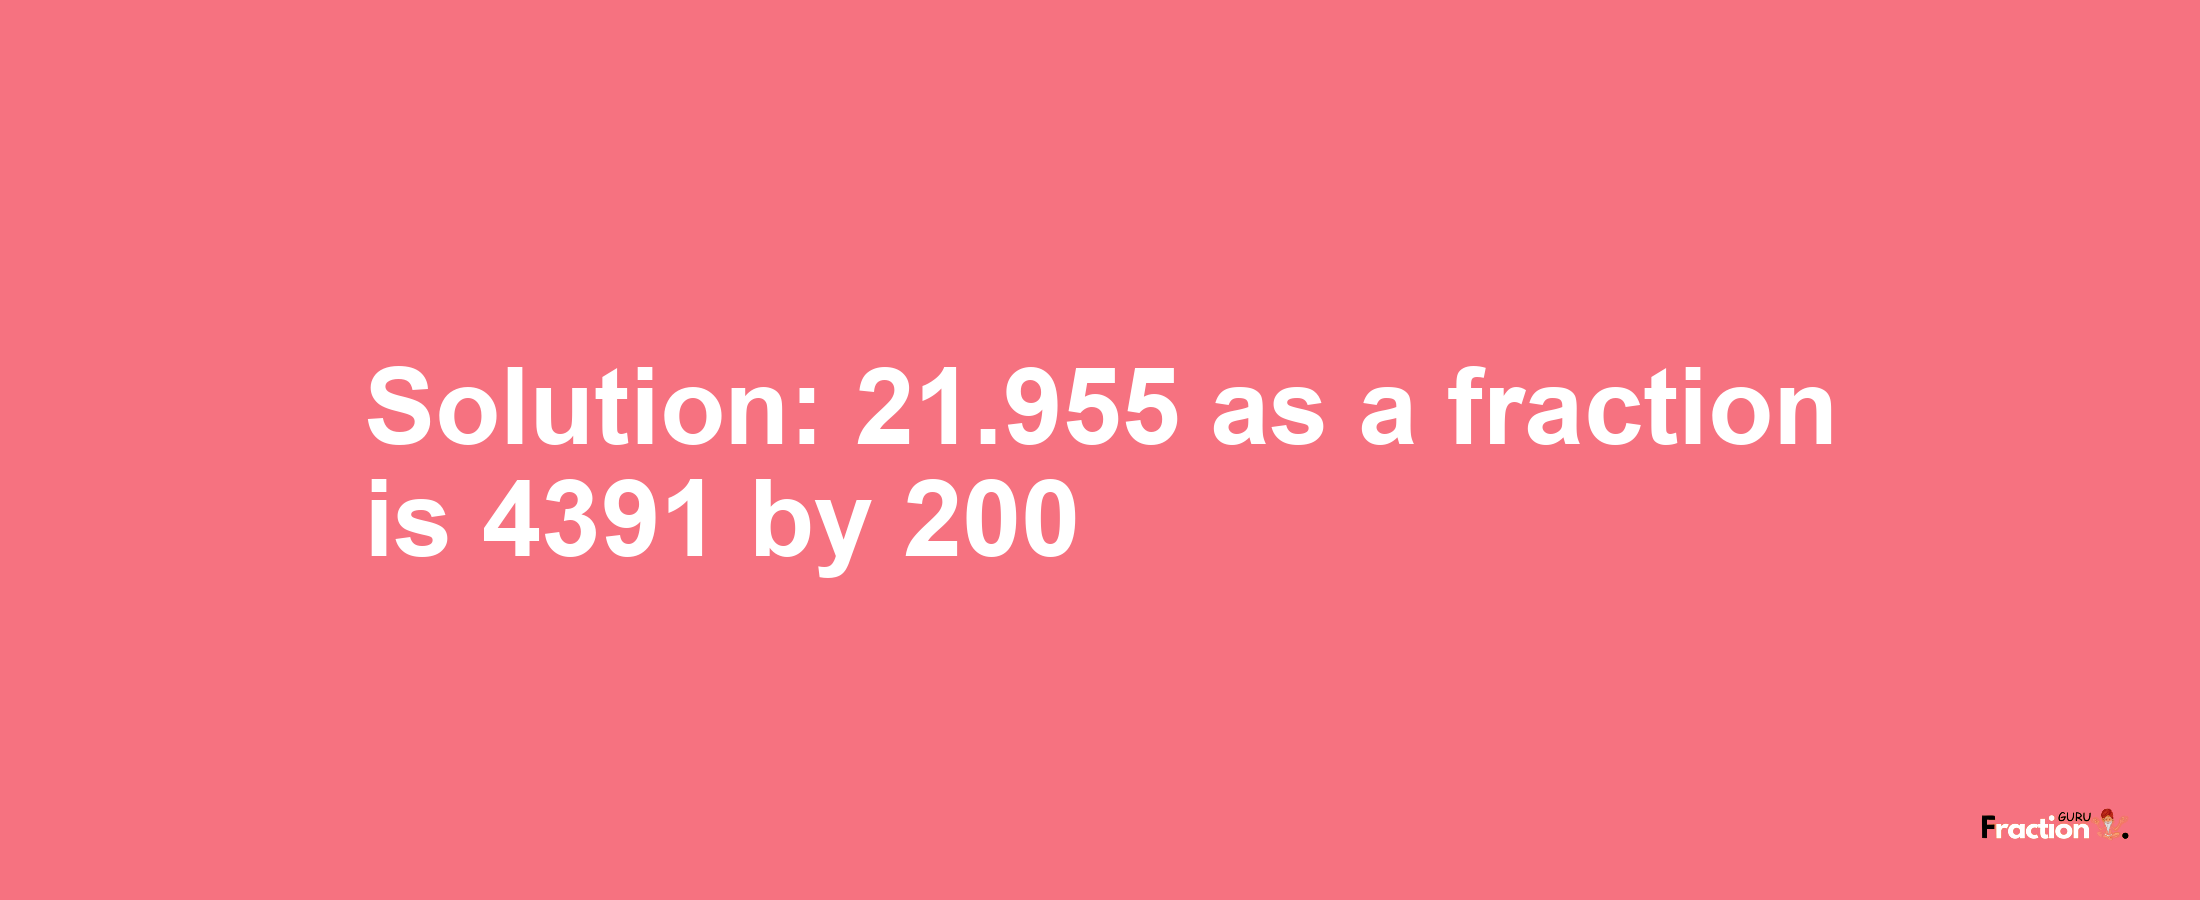 Solution:21.955 as a fraction is 4391/200